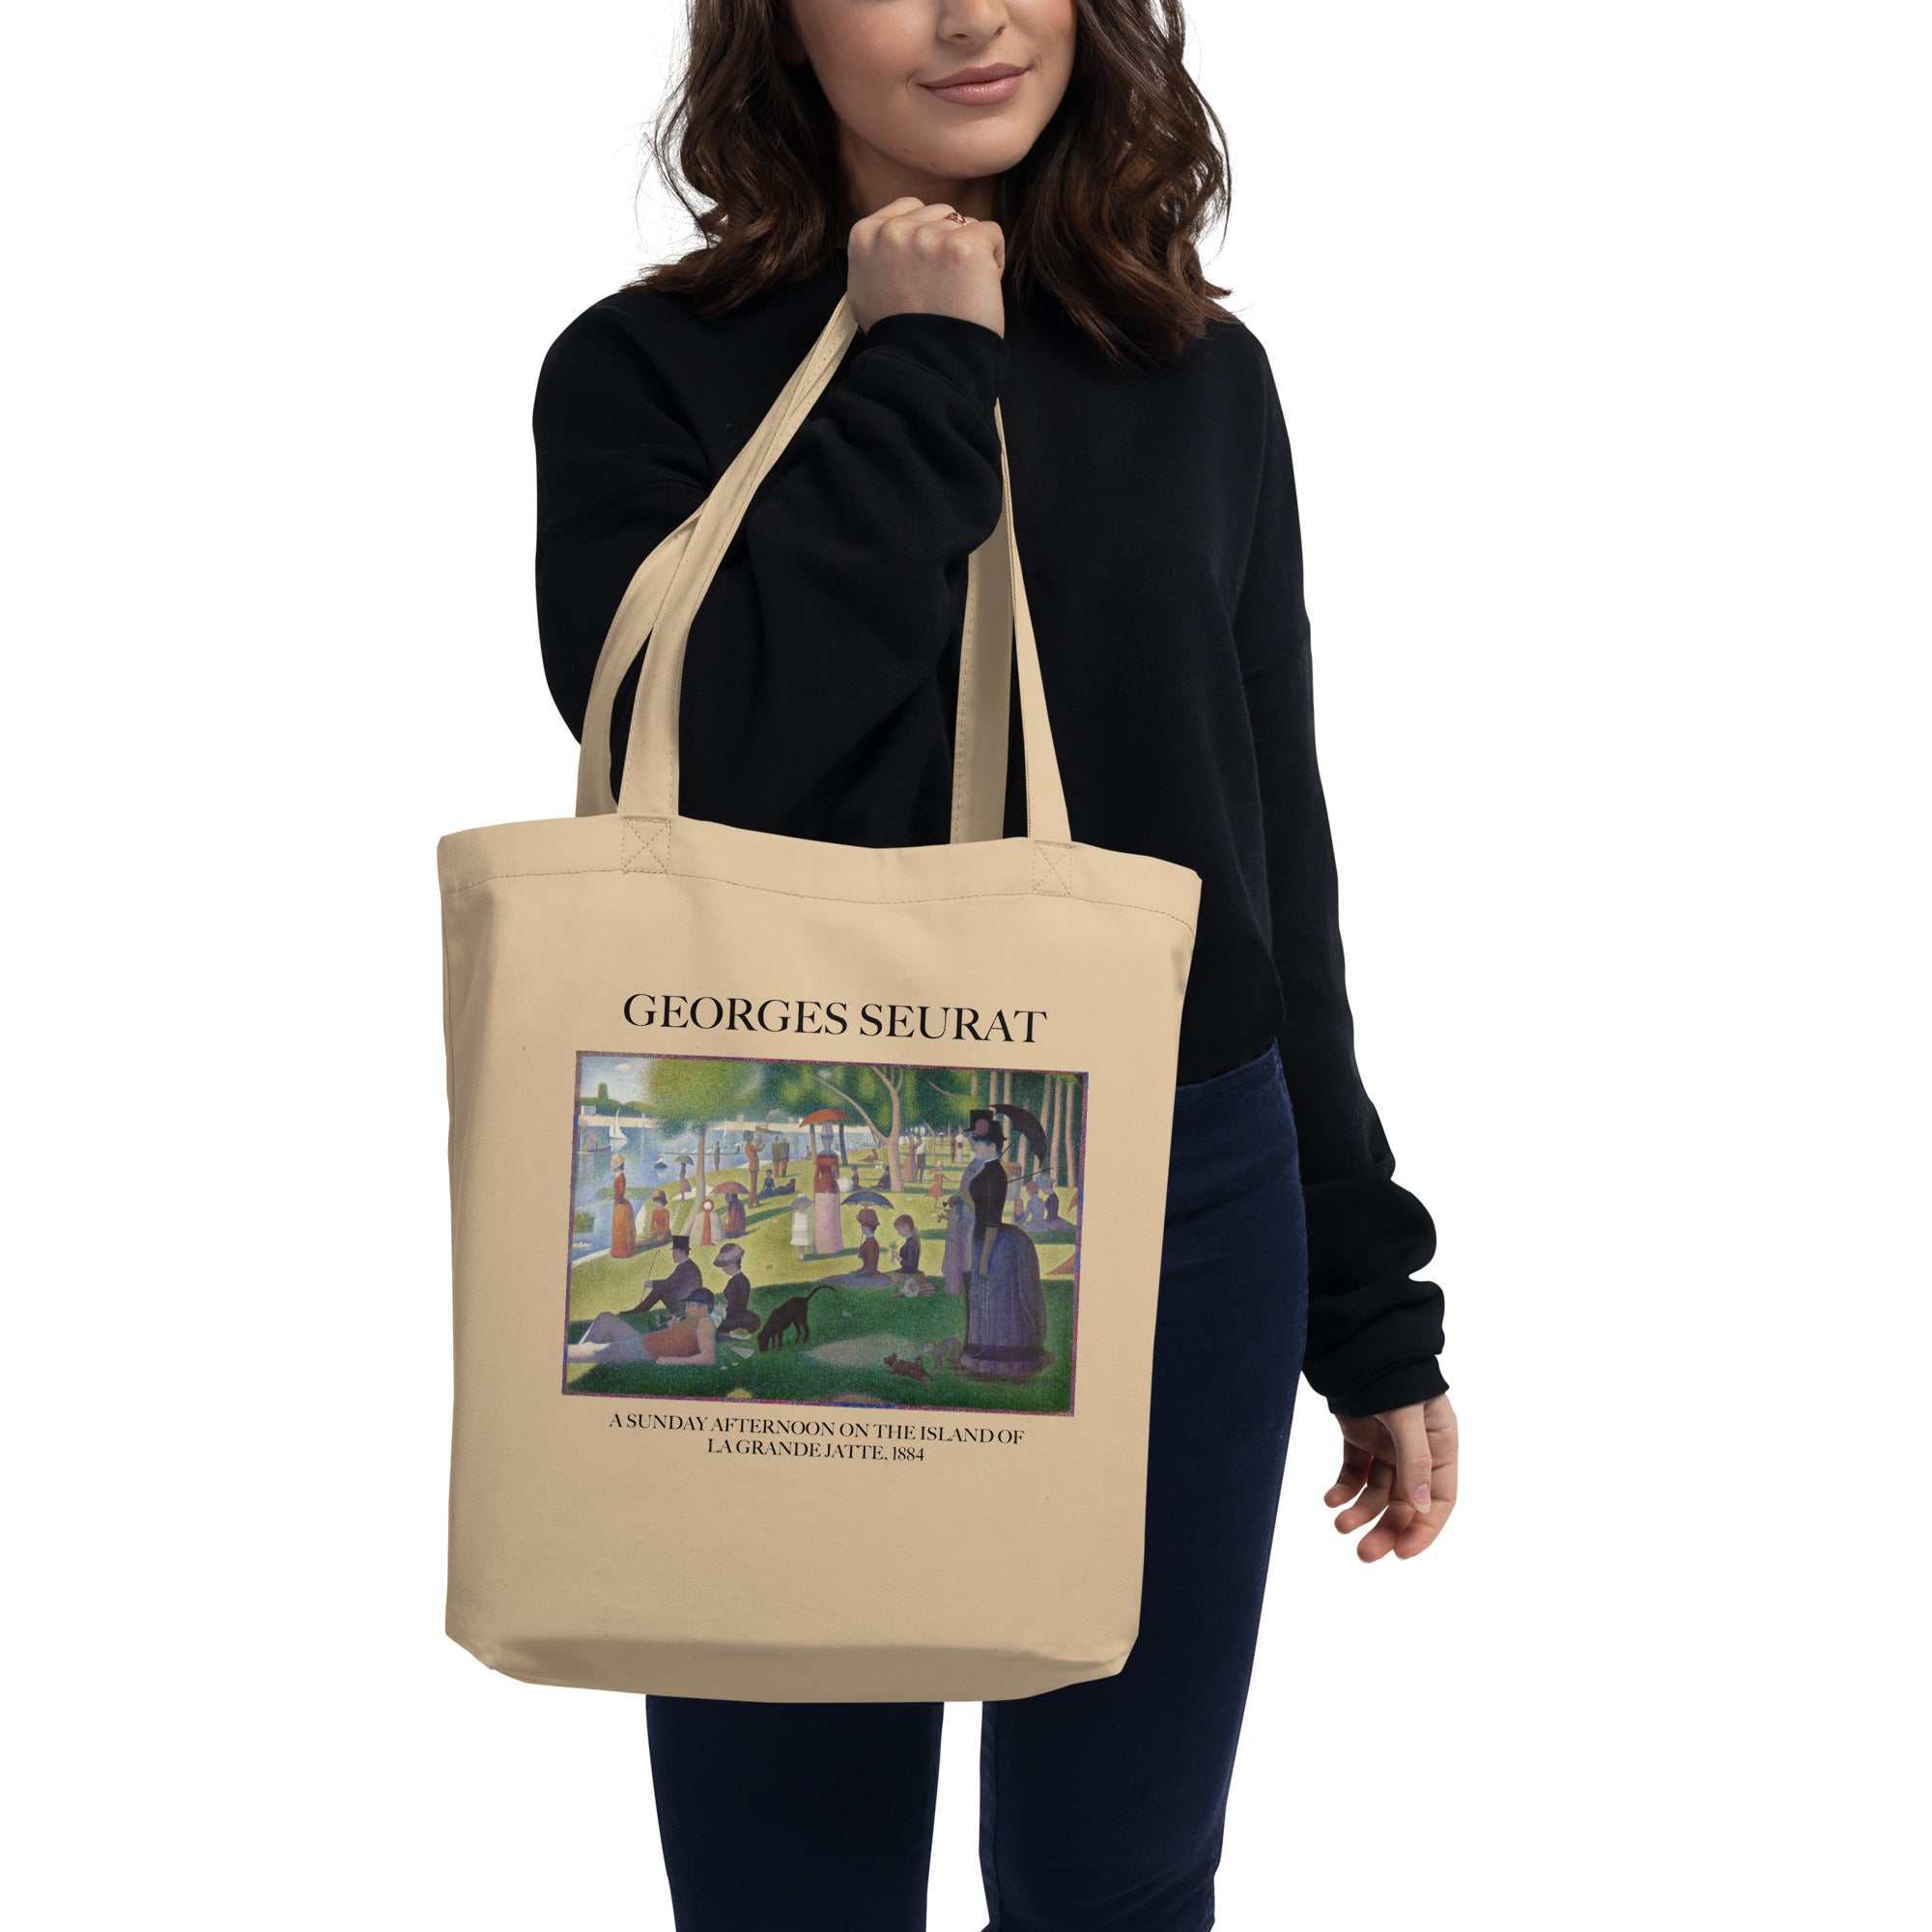 Georges Seurat 'A Sunday Afternoon on the Island of La Grande Jatte' Famous Painting Totebag | Eco Friendly Art Tote Bag